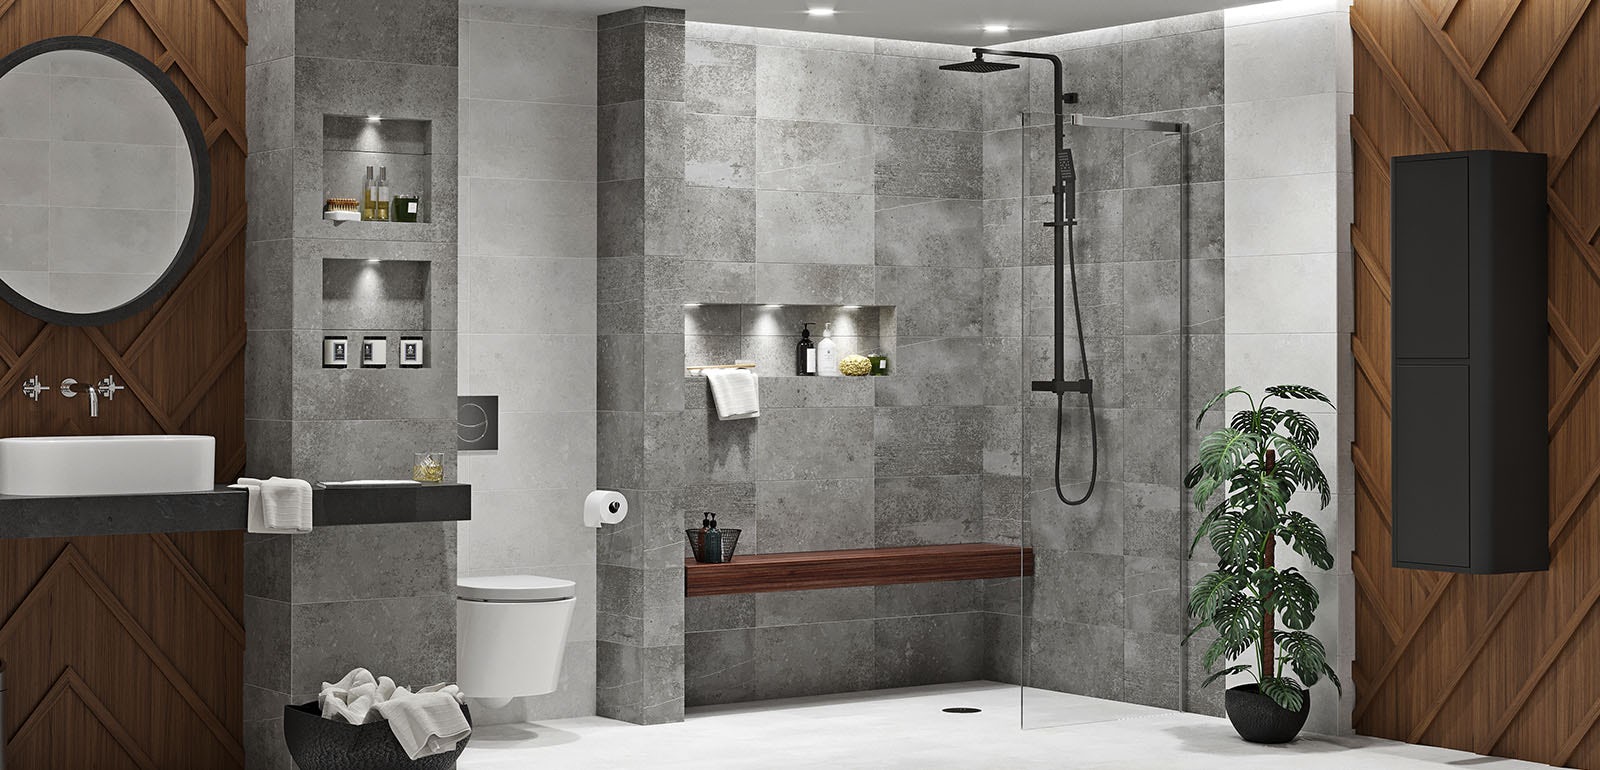 5 Reasons Why A Wet Room Is A Great Bathroom Option Victoriaplum Com